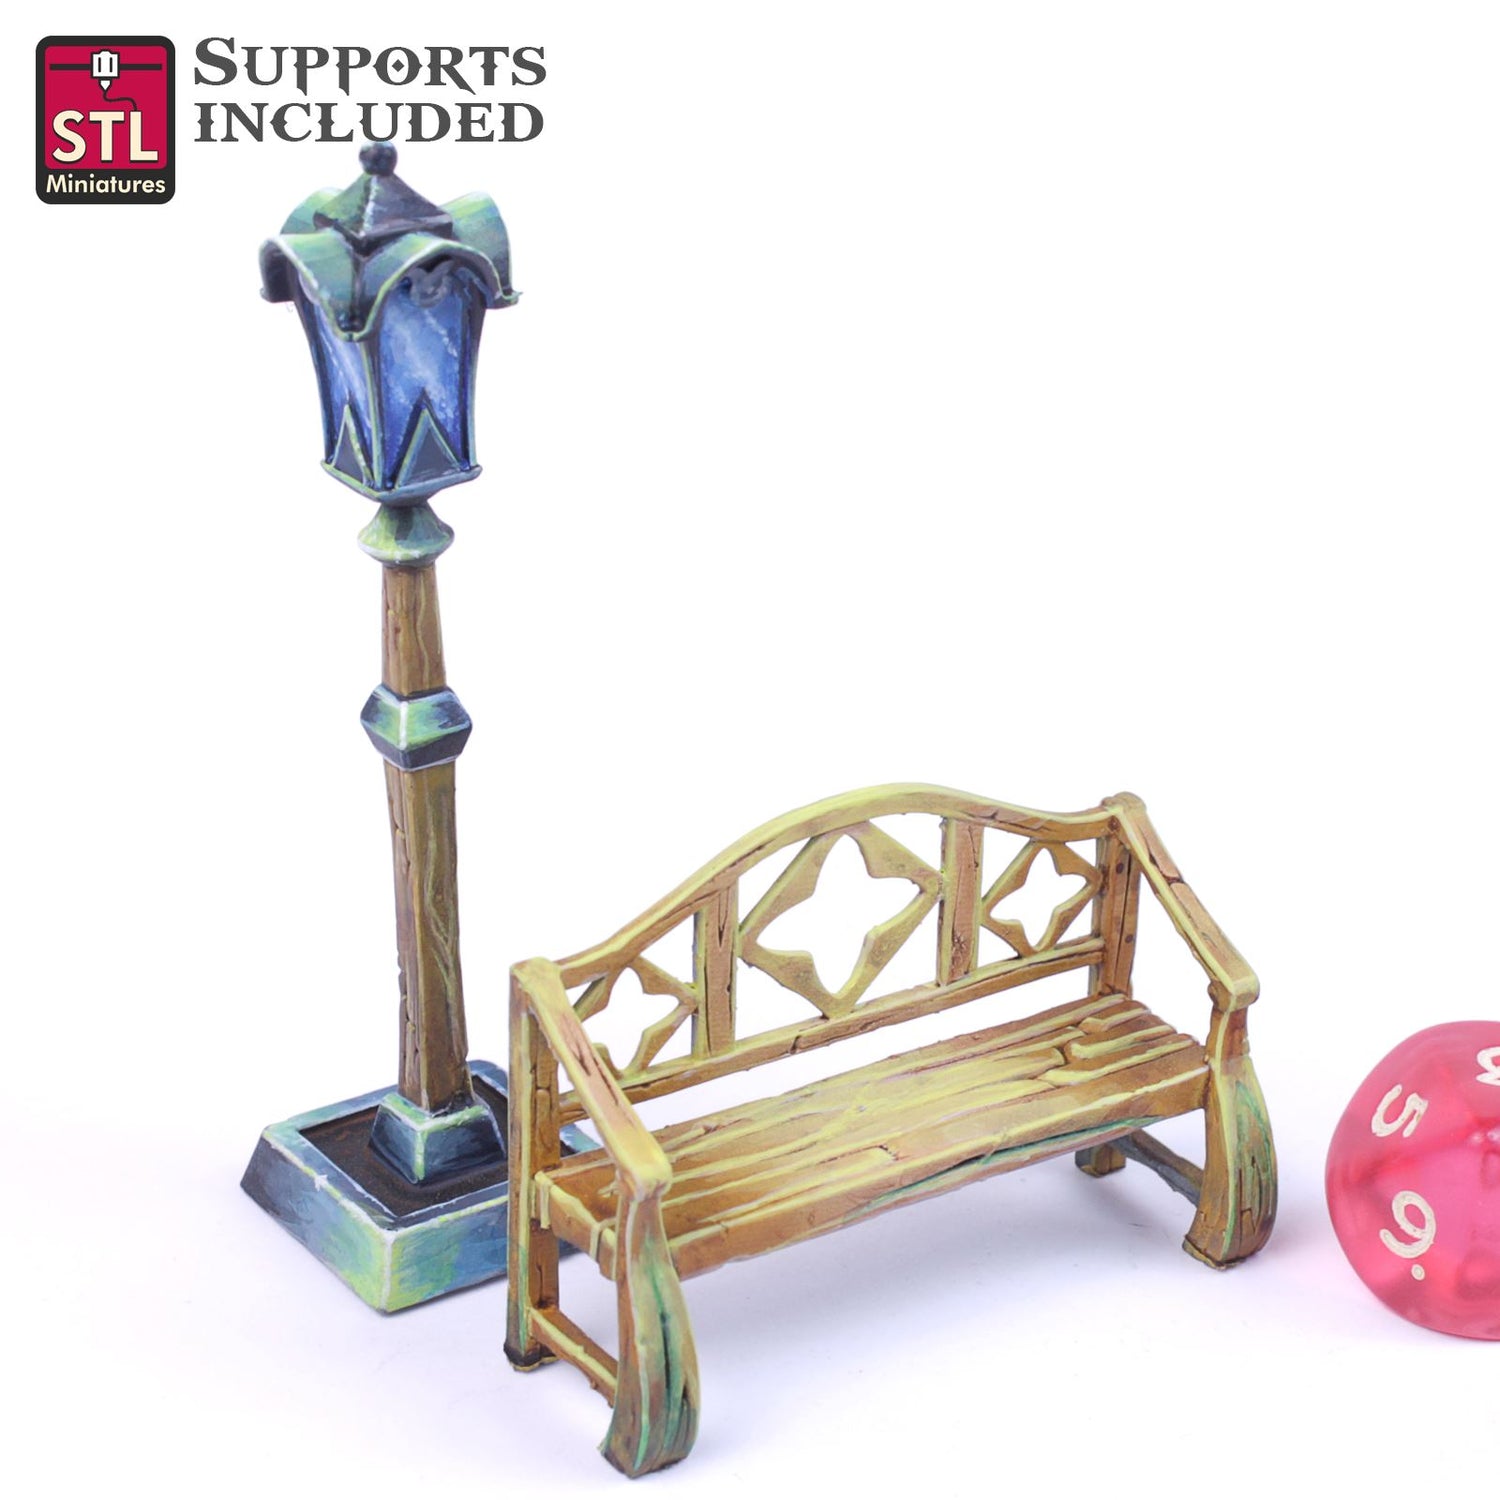 Townsfolks StreetLight Bench Scale Models STLMiniatures